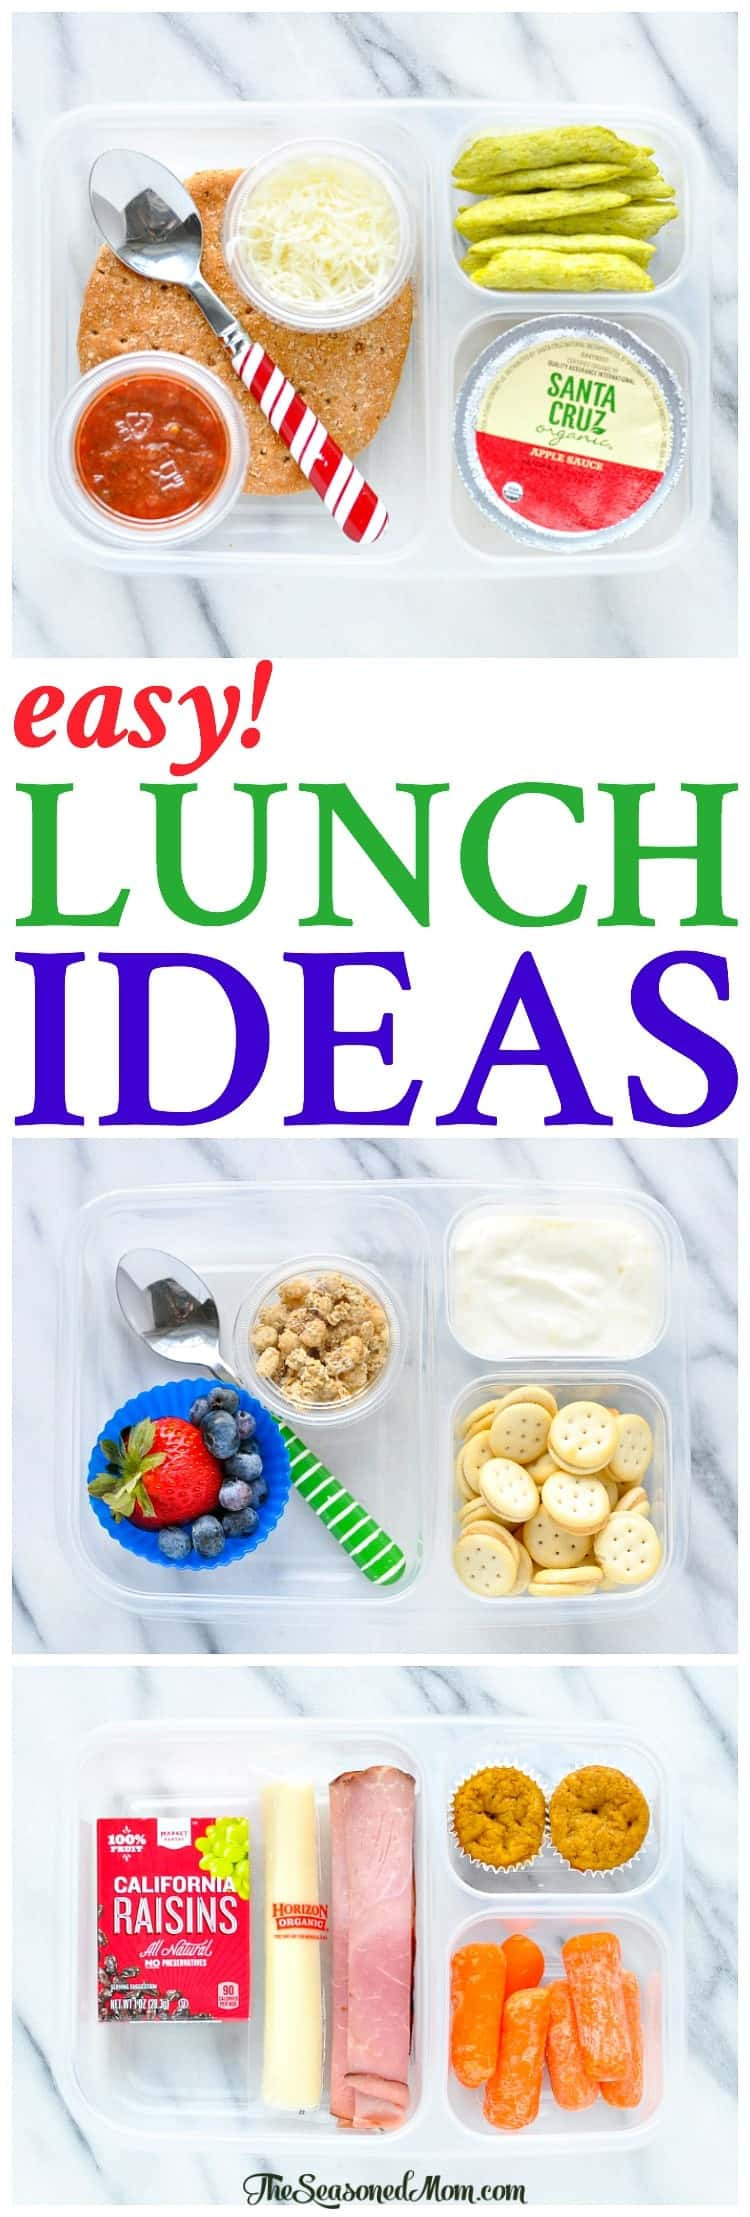 Easy Lunch Recipes For Kids
 Applesauce Pumpkin Muffins Easy Lunch Ideas The